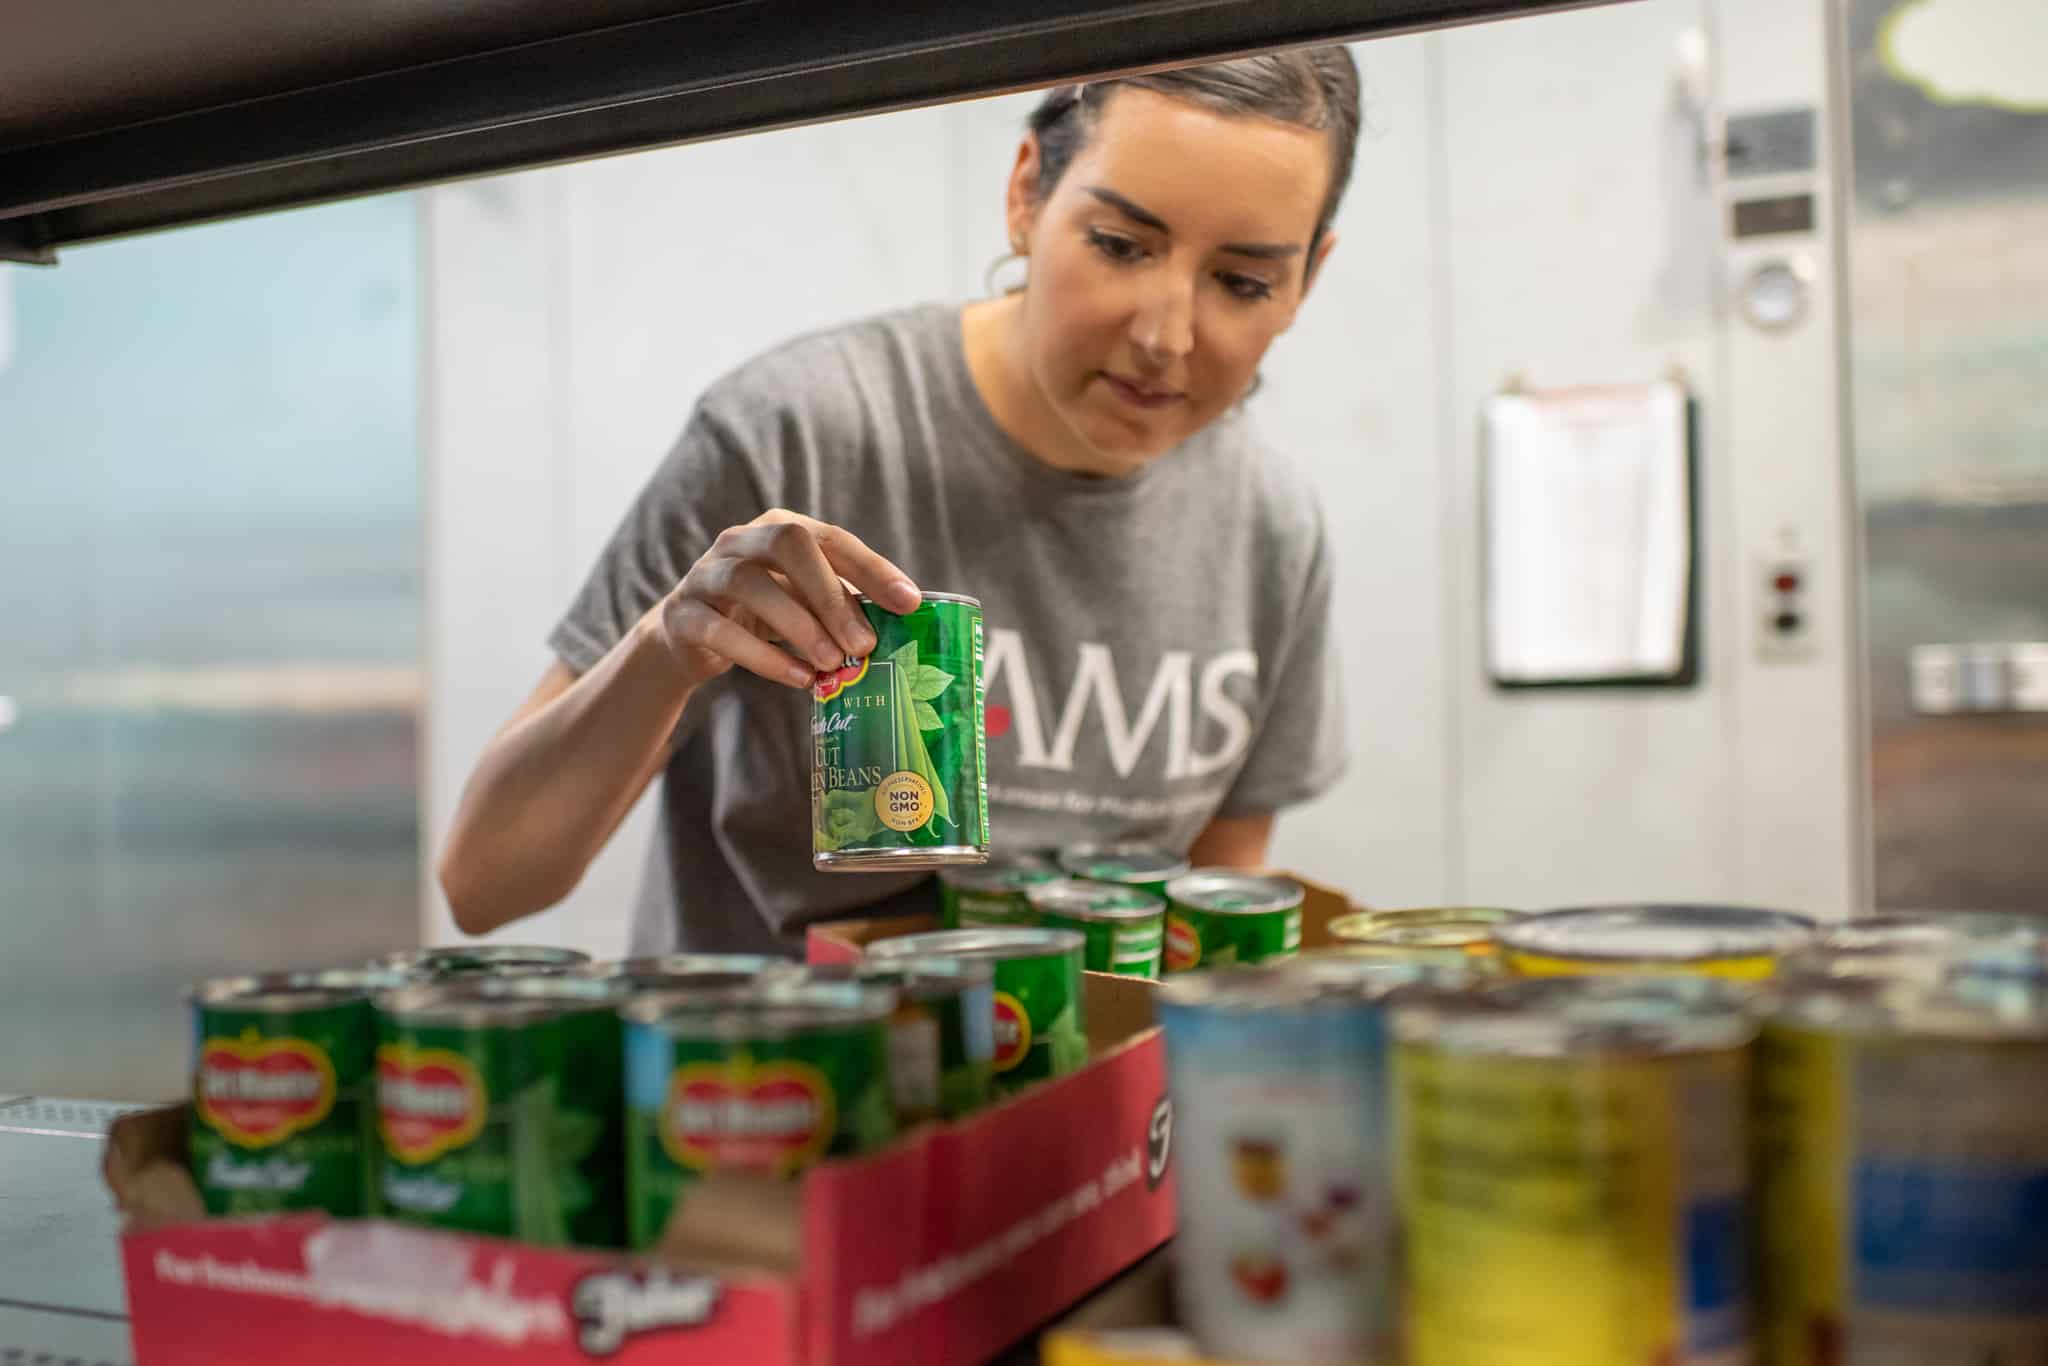 Volunteer working at UAMS school putting away canned goods